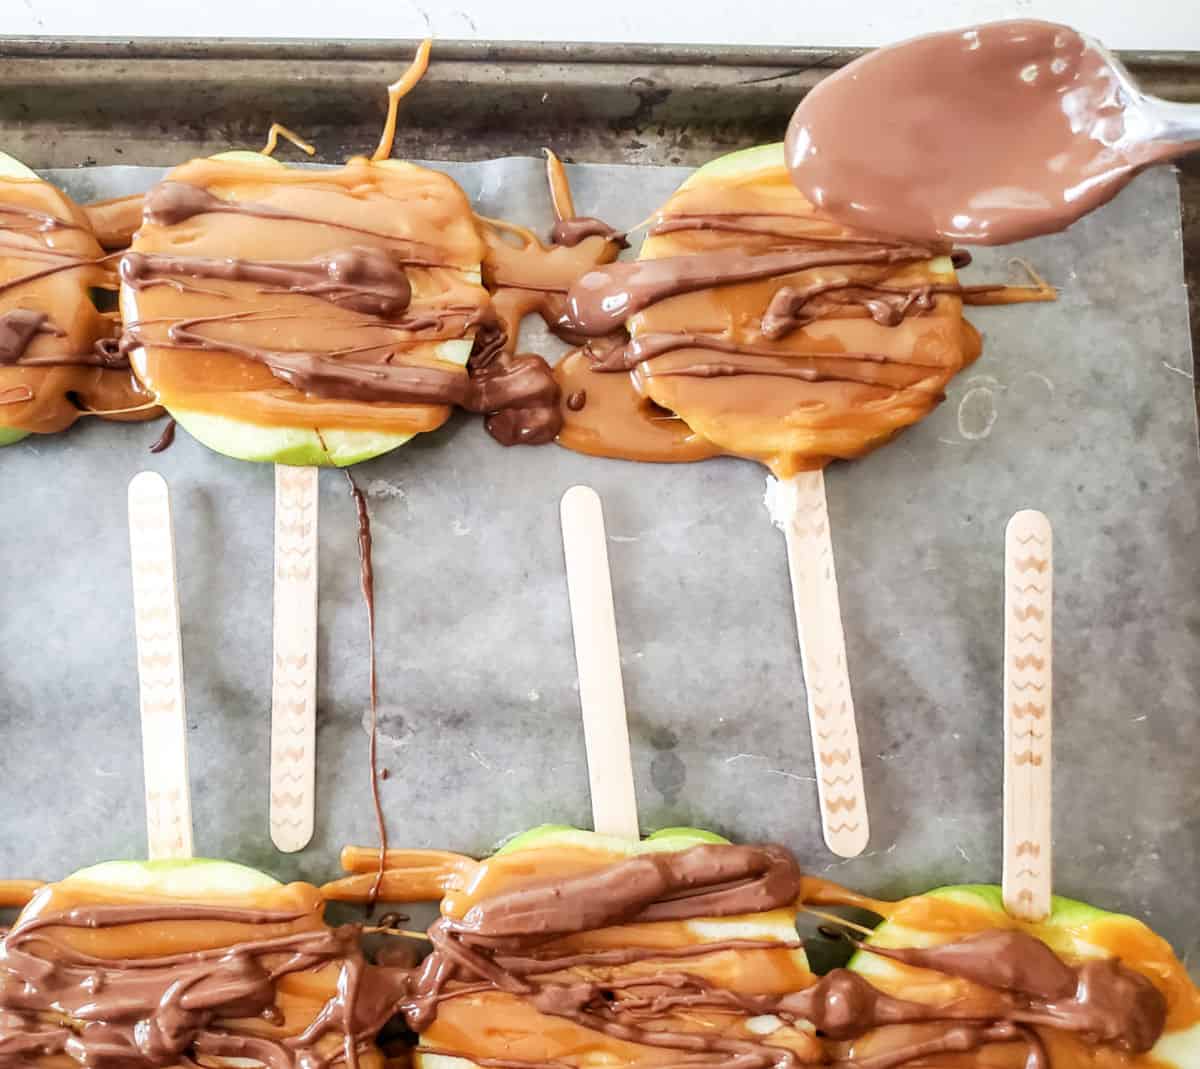 Drizzling chocolate over apple slices on parchment paper on a baking tray.